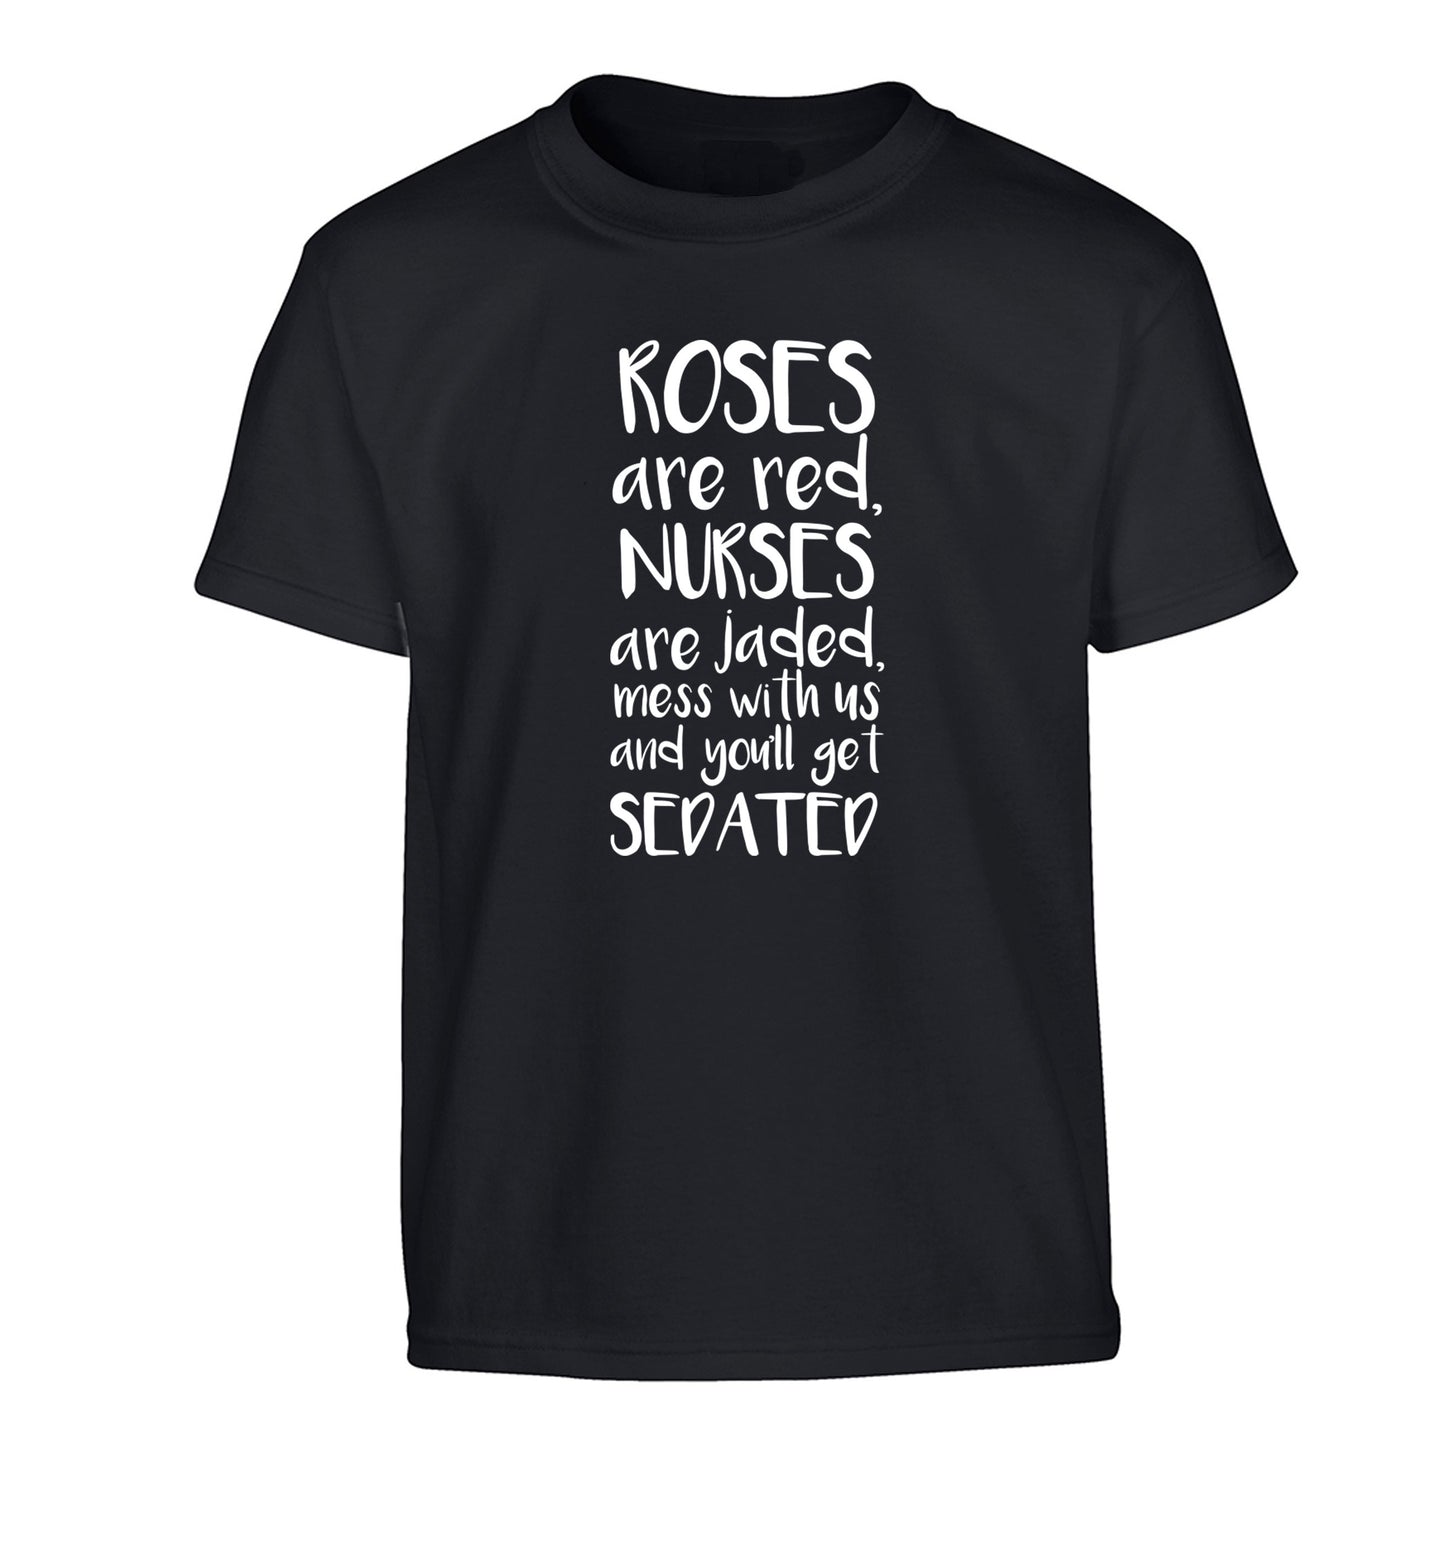 Roses are red, nurses are jaded, mess with us and you'll get sedated Children's black Tshirt 12-14 Years